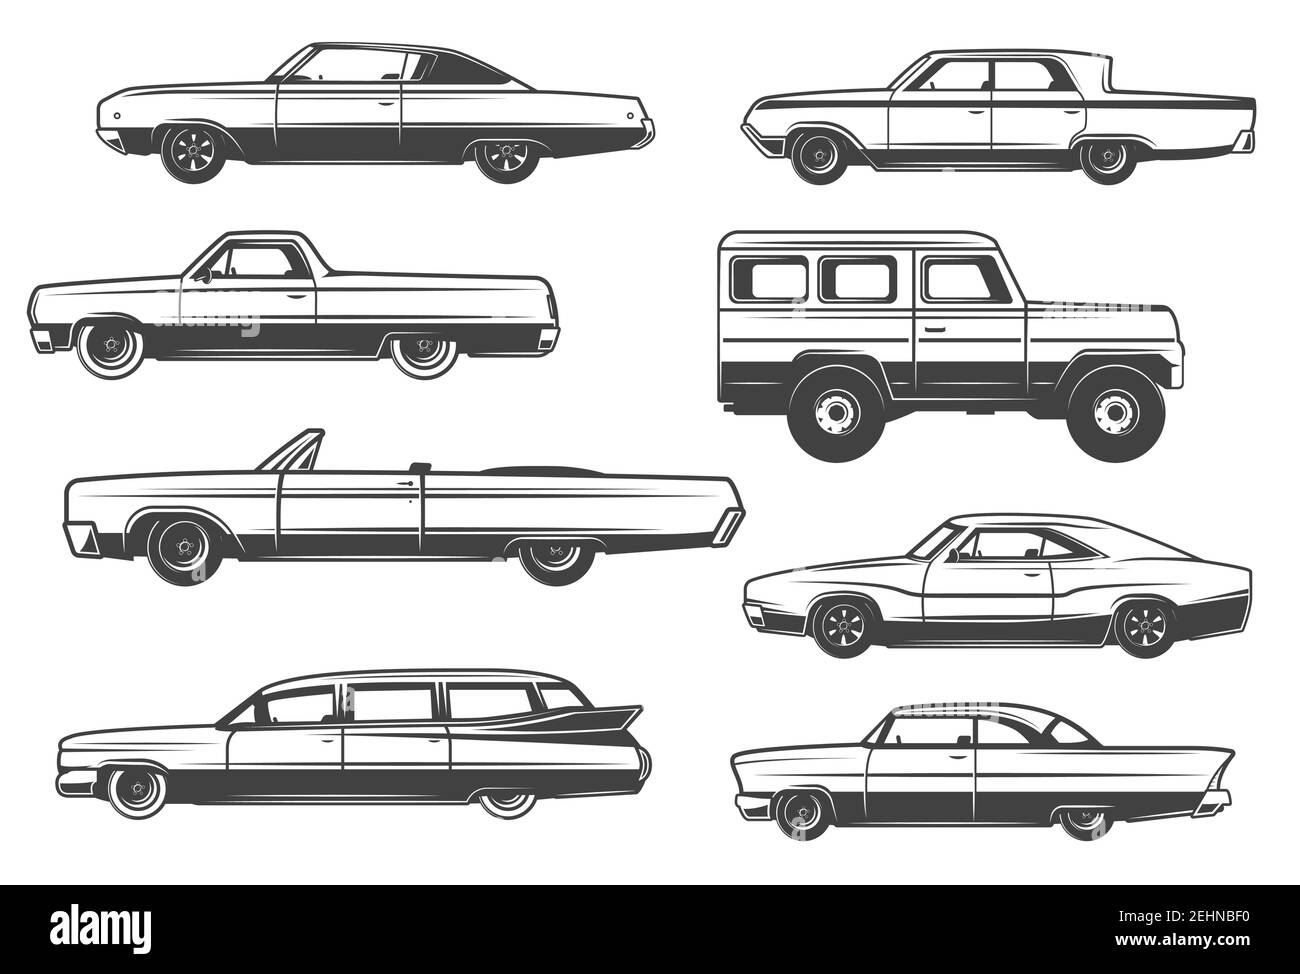 Retro cars and vintage rarity automobile models. Vector luxury limousine or cabriolet with retractable top, crossover pickup truck and sport car sedan Stock Vector